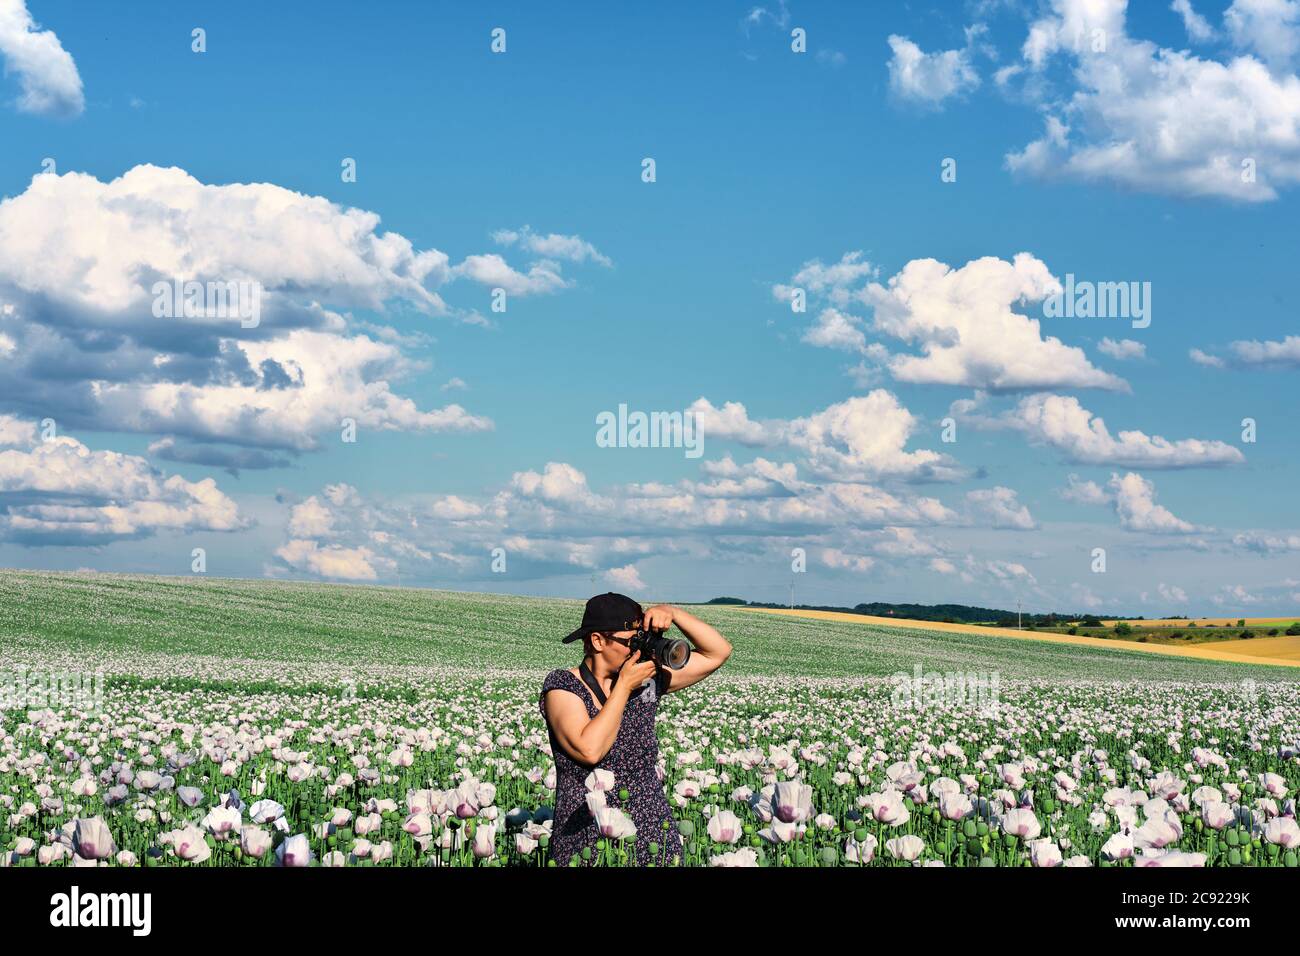 Caucasian woman, middle aged female photographer in dark dress, taking pictures of white poppy field under blue sky with clouds Stock Photo